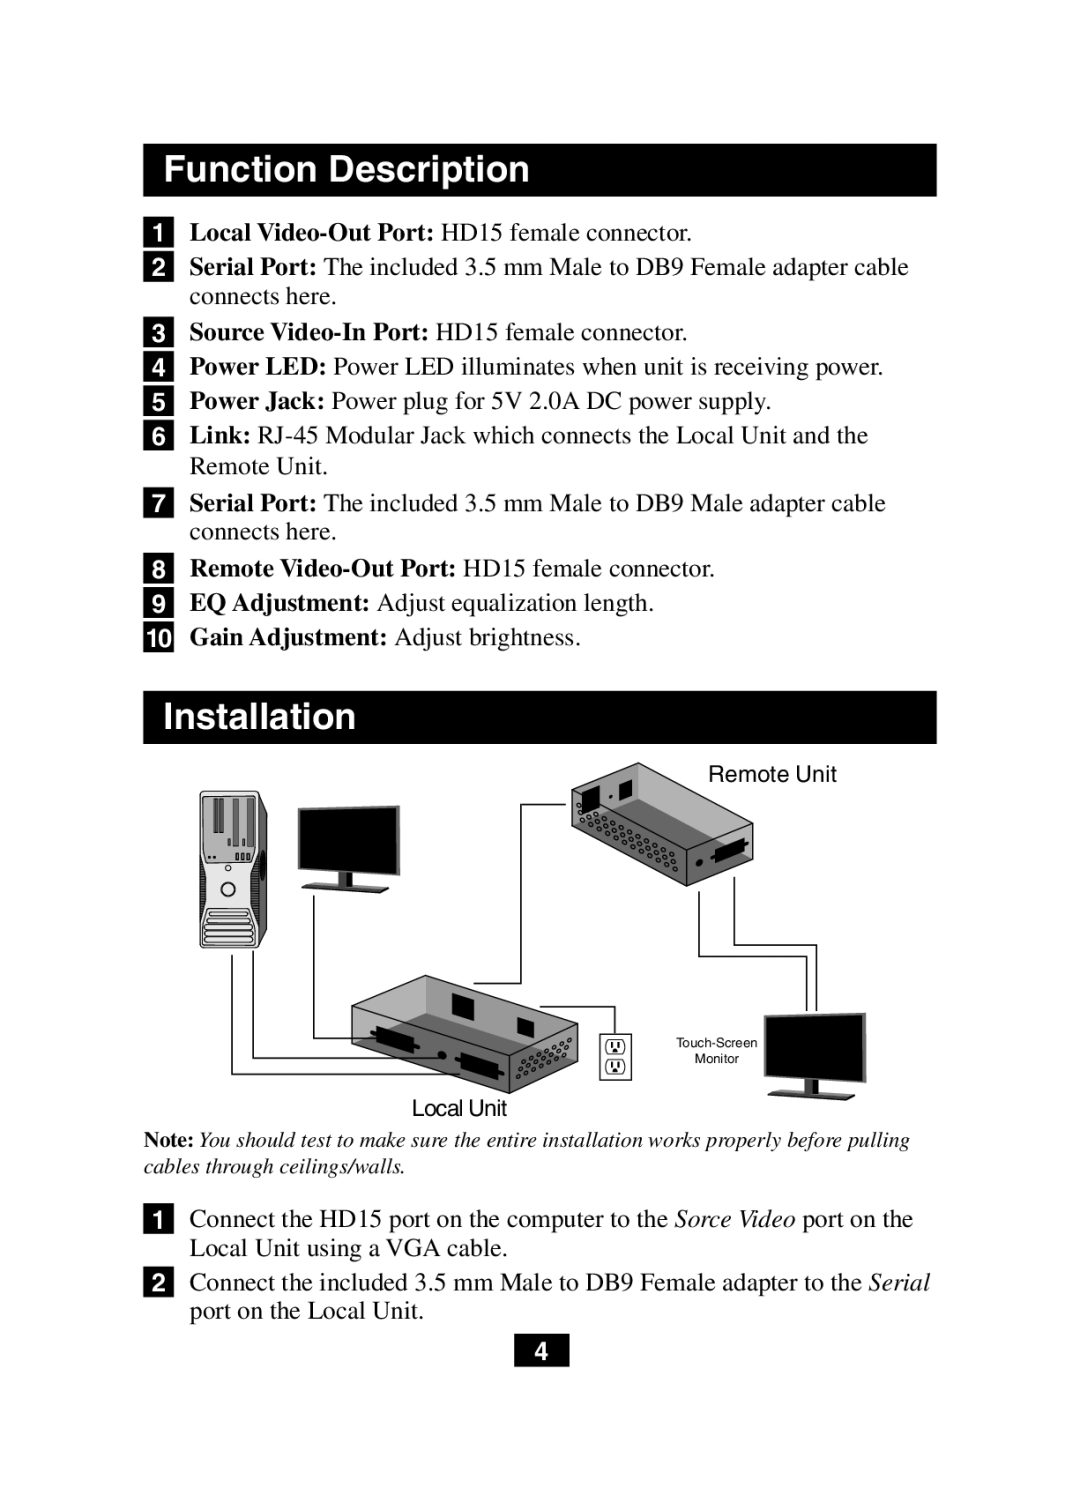 Tripp Lite B130-101S owner manual Function Description, Installation, Local Video-Out Port HD15 female connector 